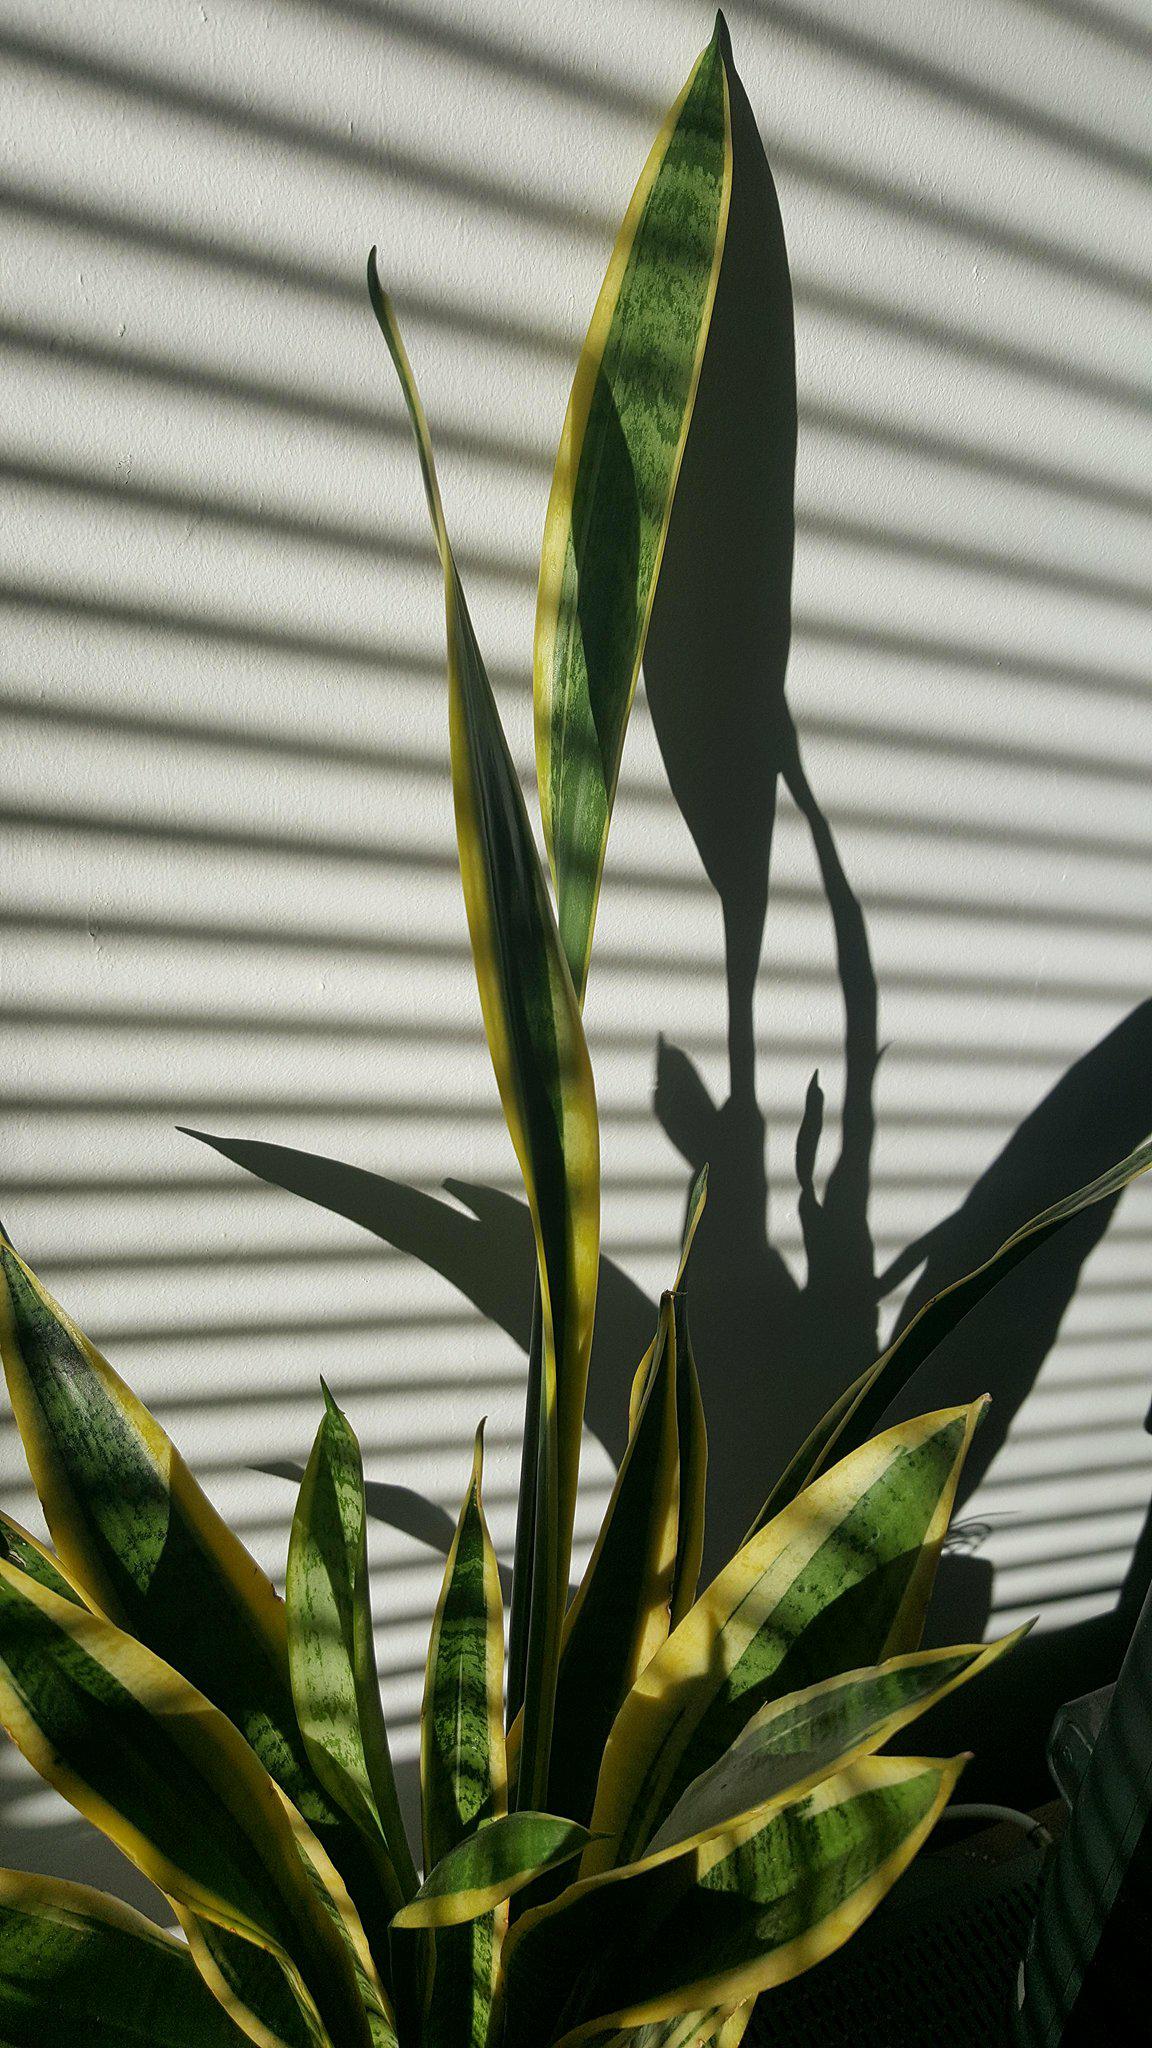 Things I’ve loved in February: Sunlight shining through the livingroom and lighting up the house plants.